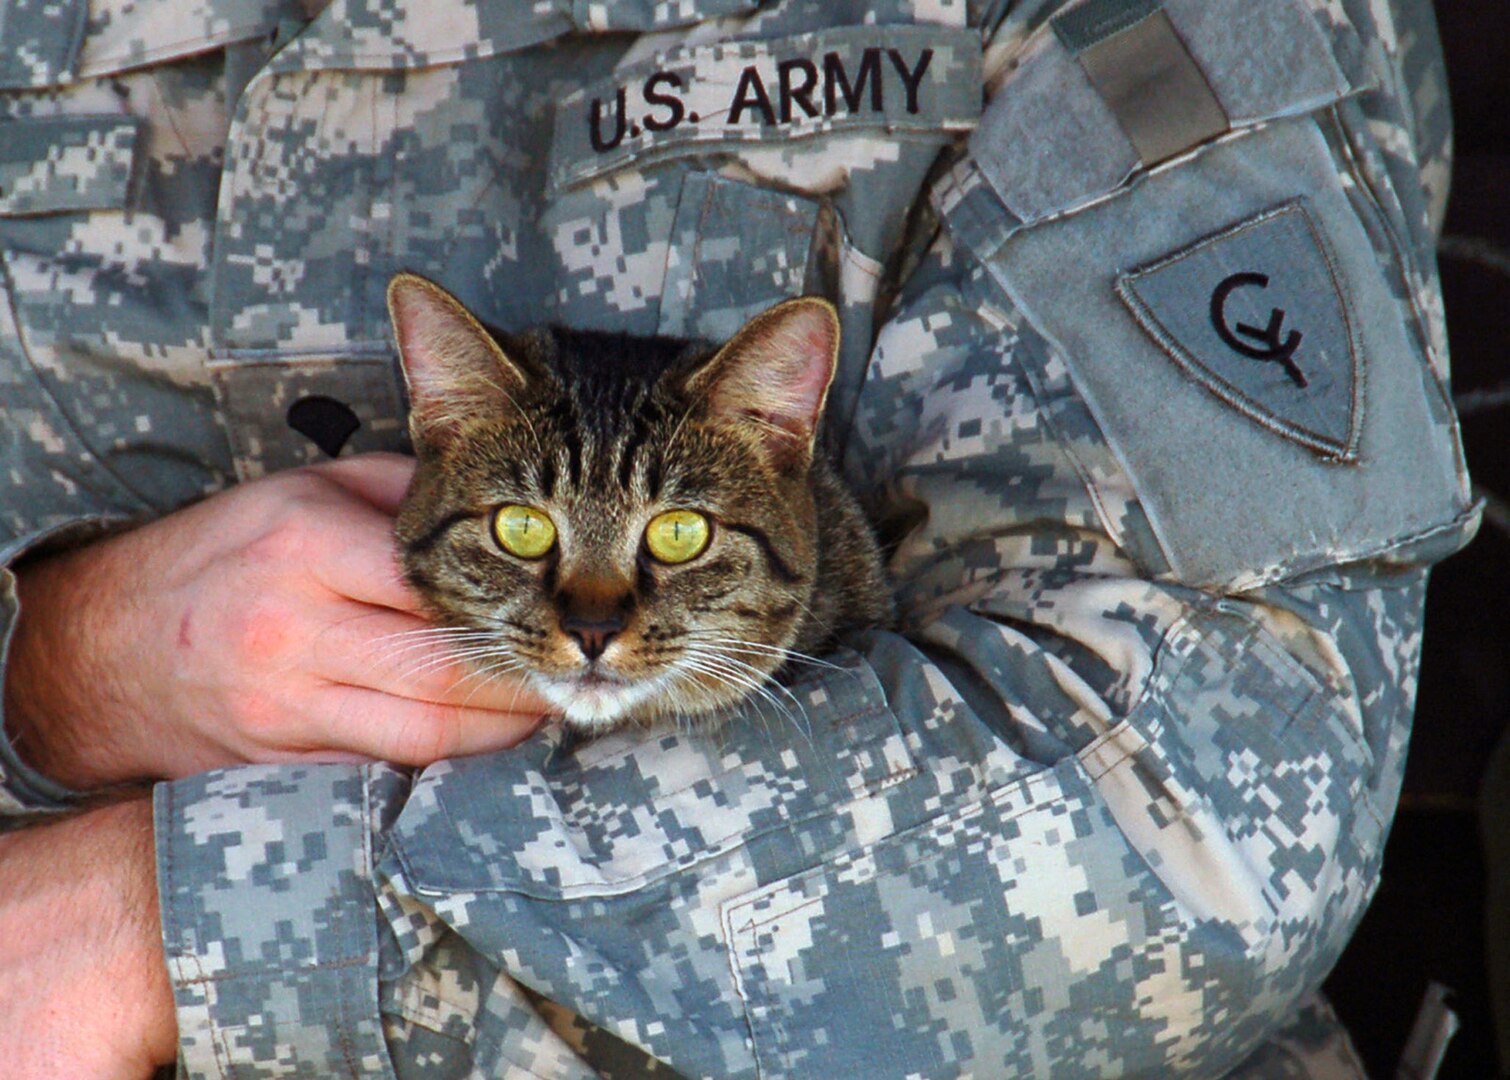 Guardian Angels for Soldier's Pet, a nonprofit volunteer group, arranges foster care for the pets of deploying servicemembers.